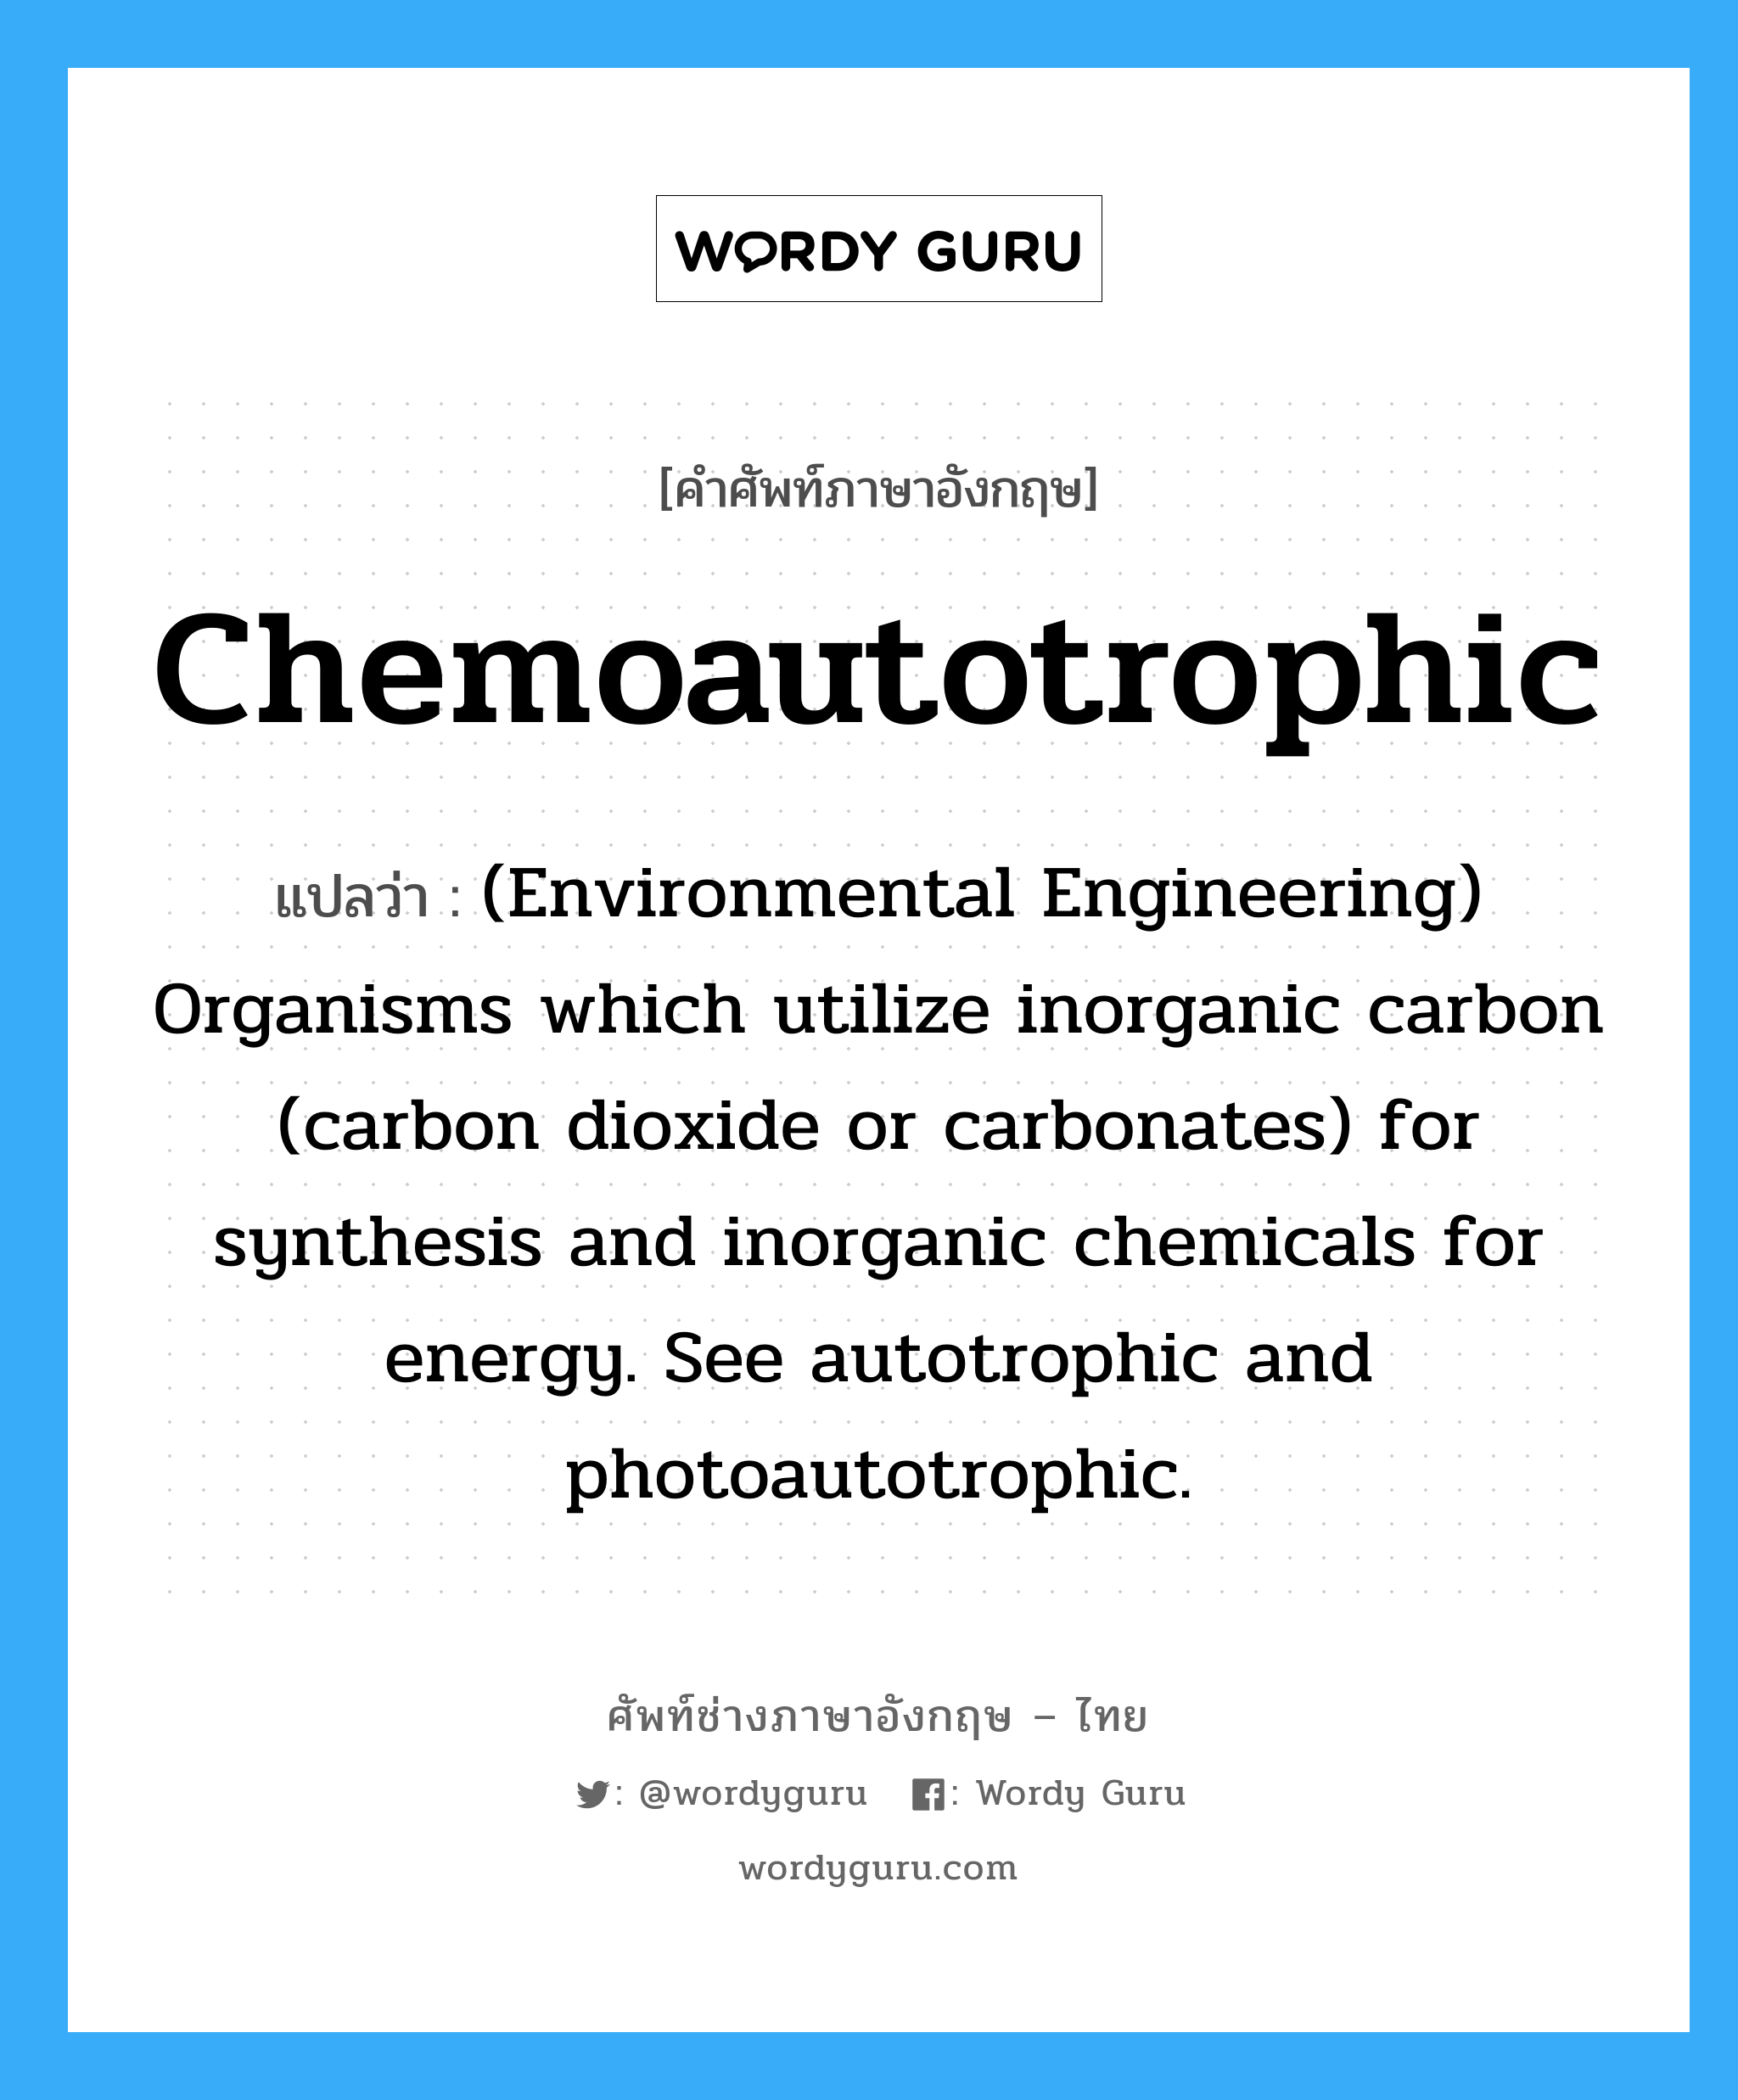 (Environmental Engineering) Organisms which utilize inorganic carbon dioxide for protoplasm synthesis and light for an energy source. See autotrophic and chemoautotrophic. ภาษาอังกฤษ?, คำศัพท์ช่างภาษาอังกฤษ - ไทย (Environmental Engineering) Organisms which utilize inorganic carbon (carbon dioxide or carbonates) for synthesis and inorganic chemicals for energy. See autotrophic and photoautotrophic. คำศัพท์ภาษาอังกฤษ (Environmental Engineering) Organisms which utilize inorganic carbon (carbon dioxide or carbonates) for synthesis and inorganic chemicals for energy. See autotrophic and photoautotrophic. แปลว่า Chemoautotrophic